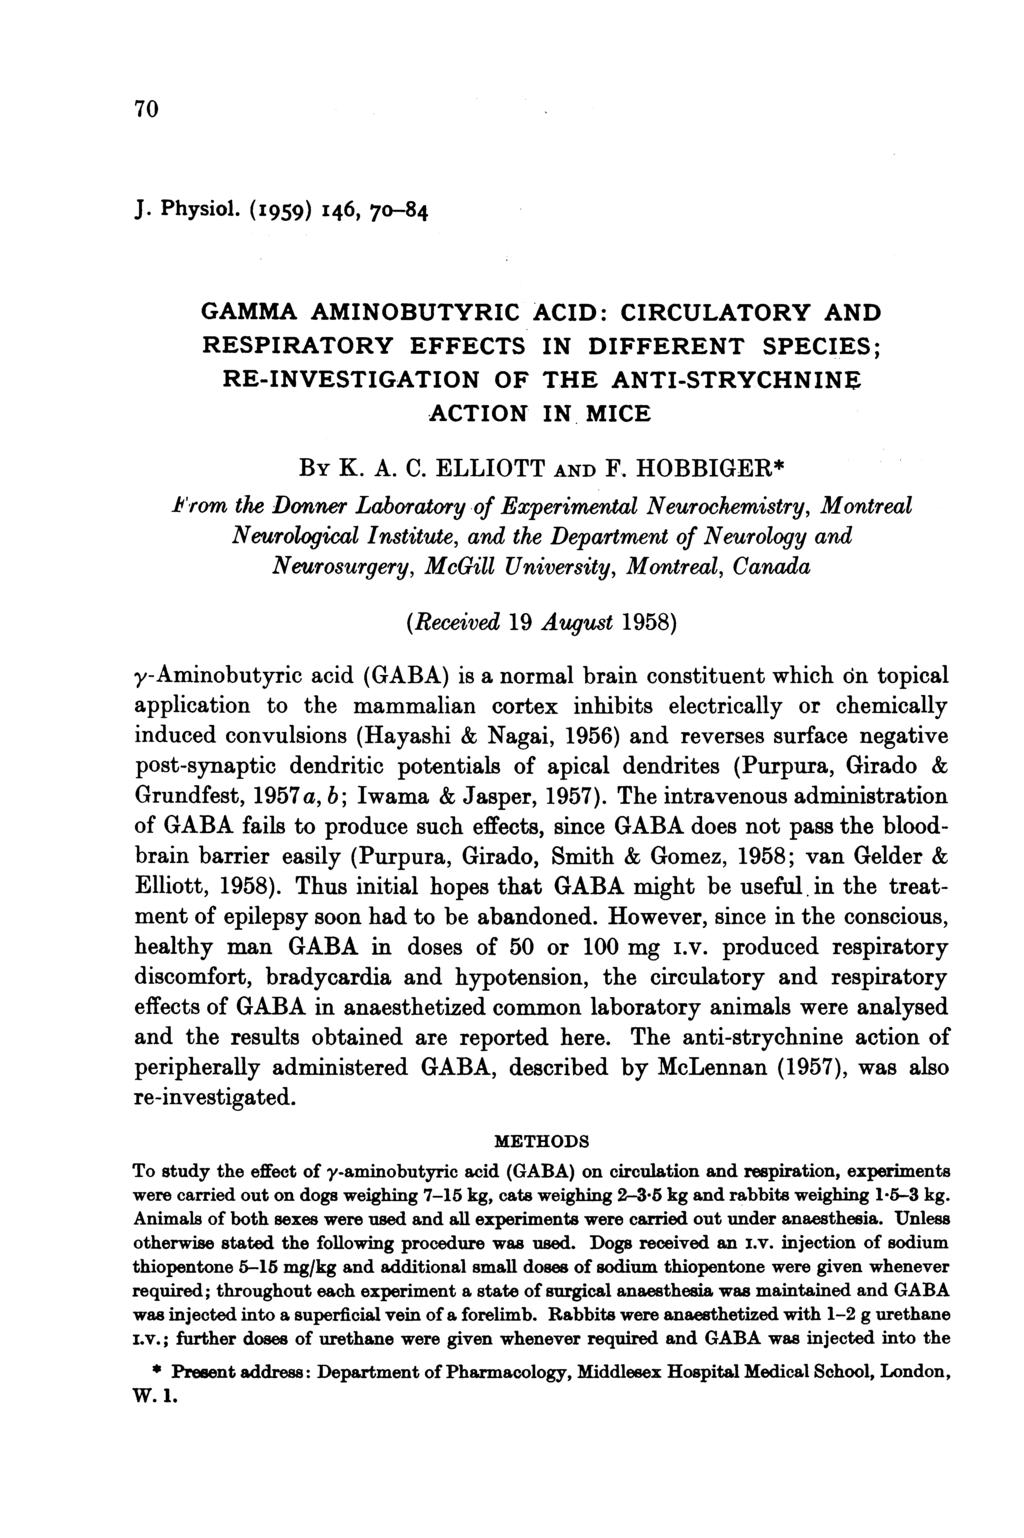 70 J. Physiol. (I959) I46, 7o-84 GAMMA AMINOBUTYRIC ACID: CIRCULATORY AND RESPIRATORY EFFECTS IN DIFFERENT SPECIES; RE-INVESTIGATION OF THE ANTI-STRYCHNINE ACTION IN MICE BY K. A. C. ELLIOTT AND F.